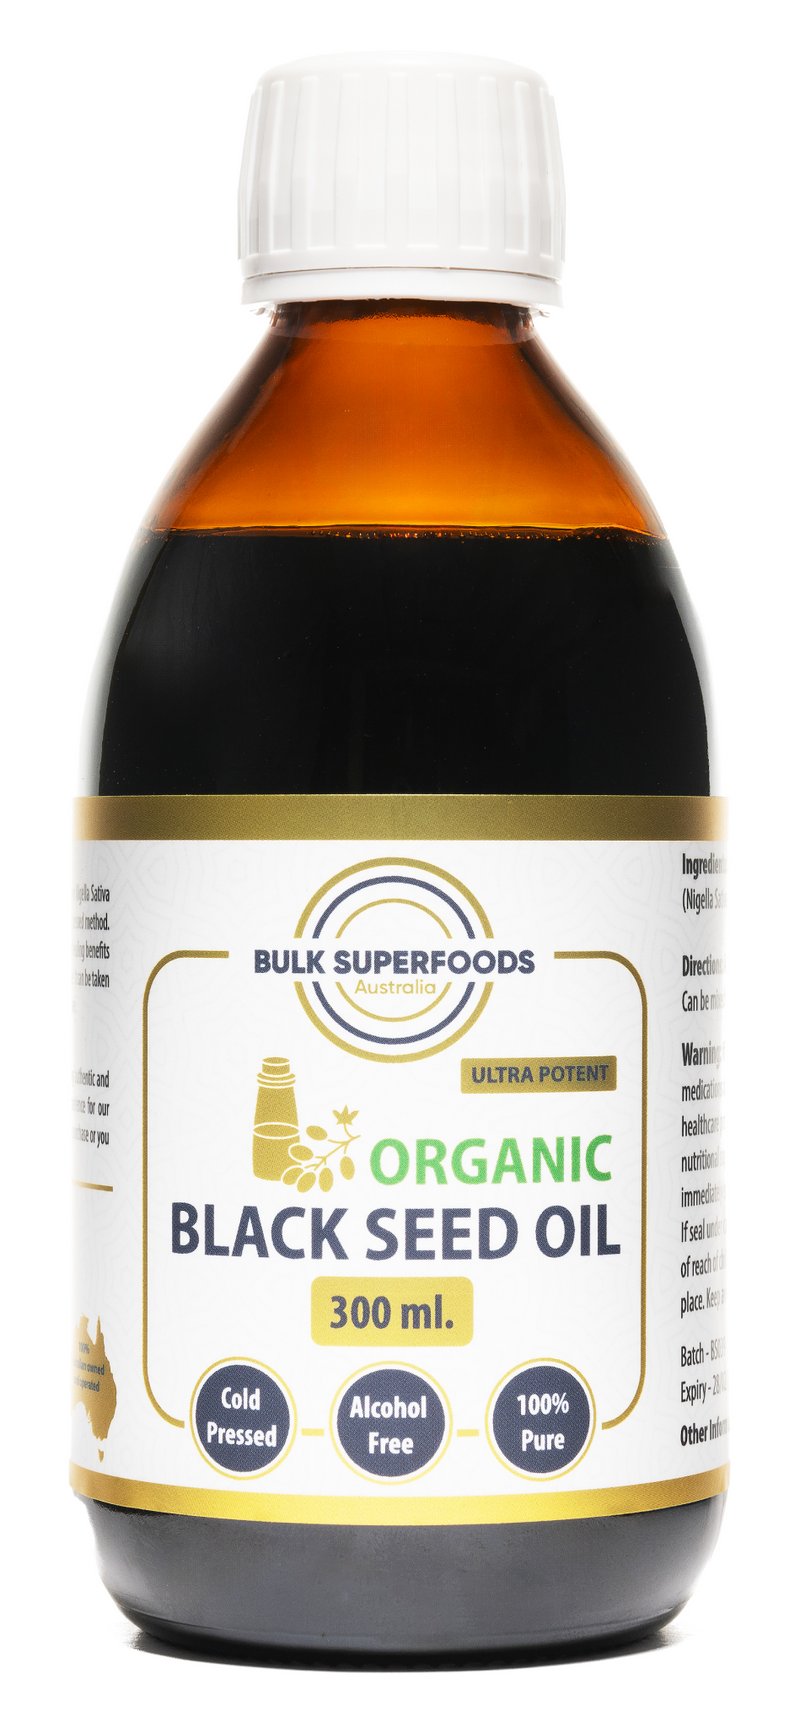 Ultra Potent Black seed Oil 300ml by Bulk Superfoods